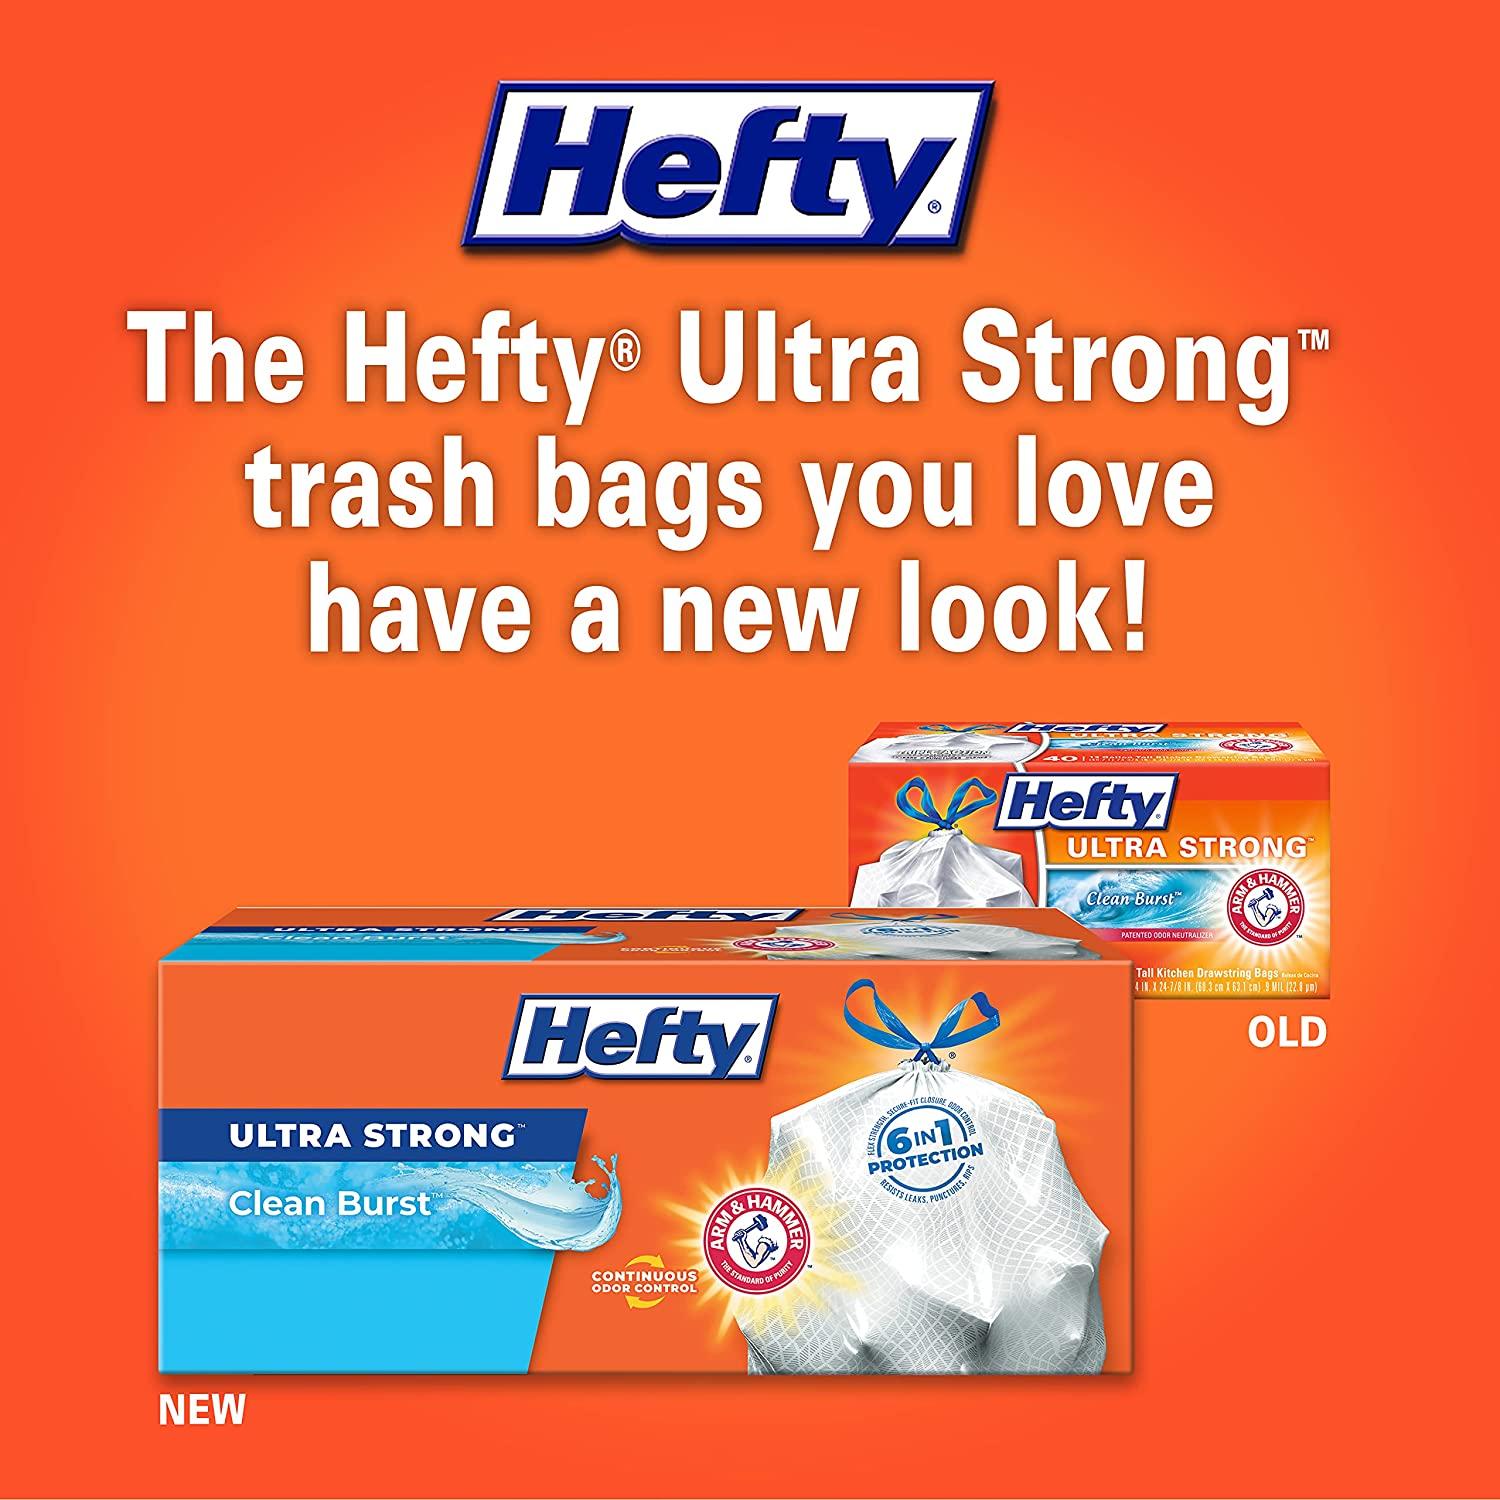 Hefty Ultra Strong Tall Kitchen Trash Bags, Clean Burst Scent, 13 Gallon,  40 Count